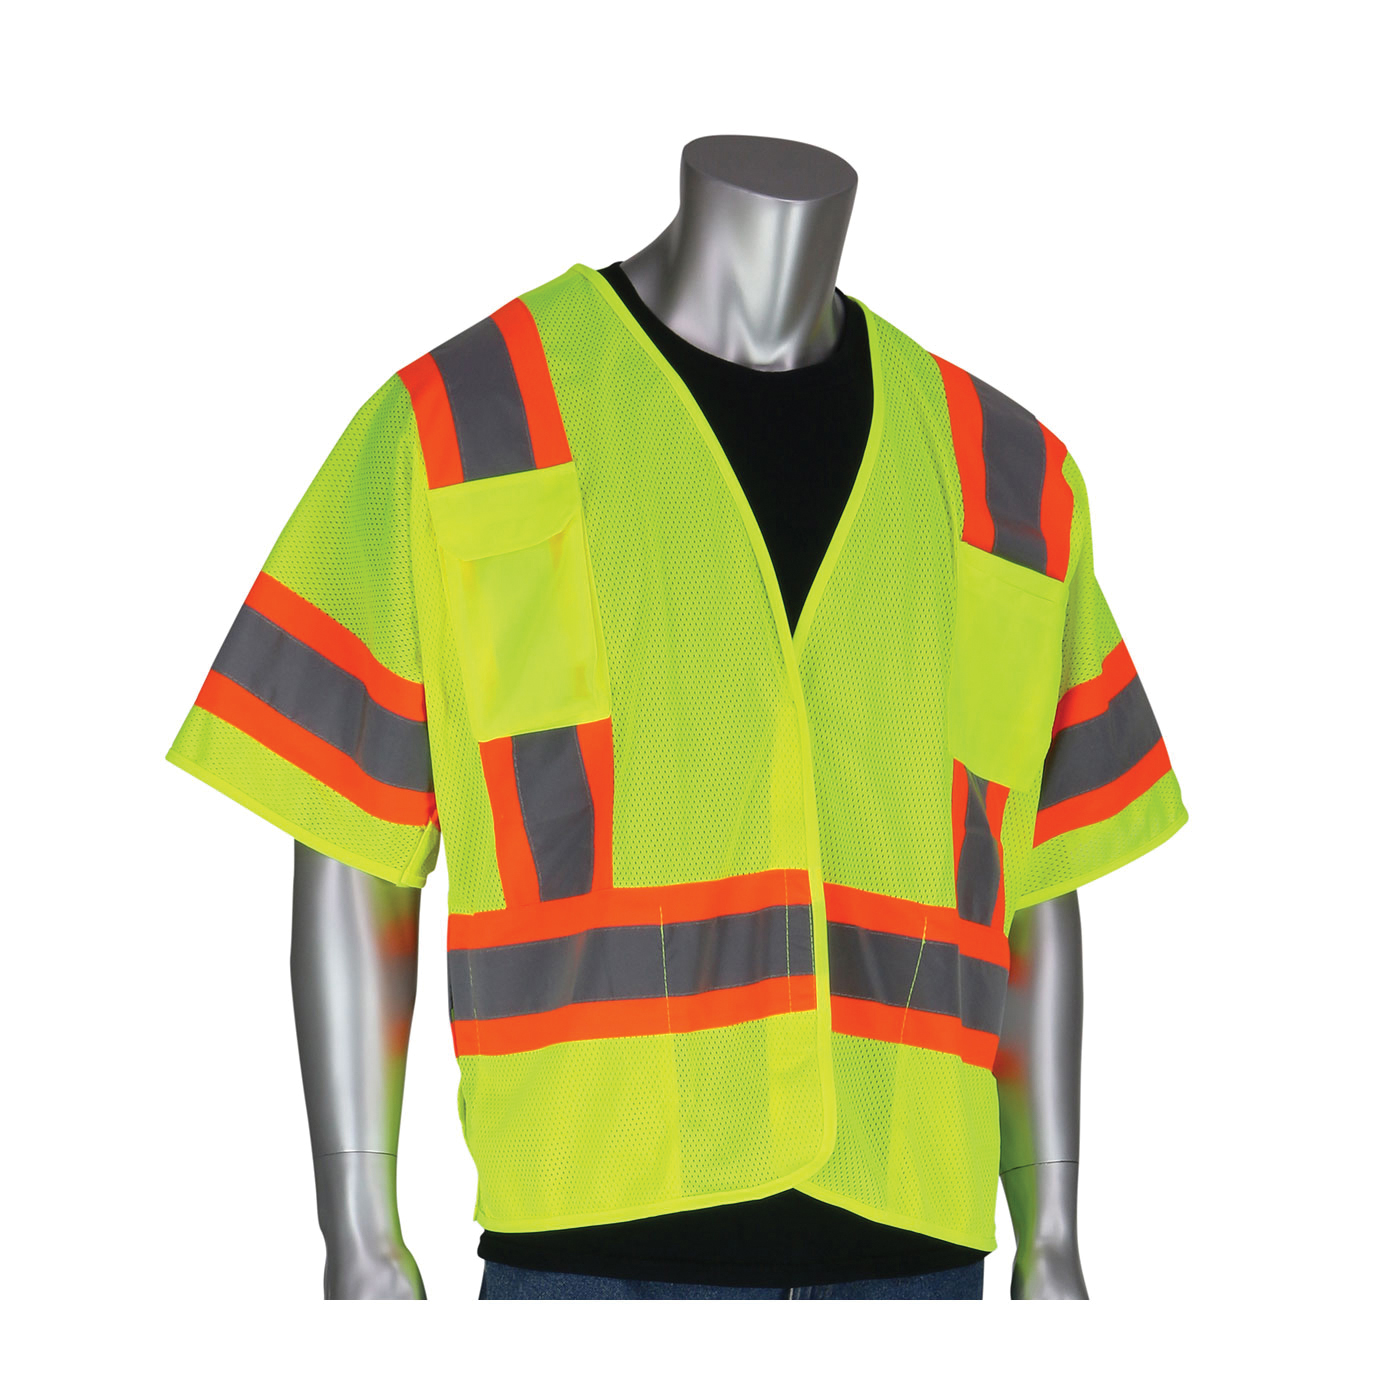 PIP® 303-5PMTT-LY/S 2-Tone Safety Vest, S, Hi-Viz Lime Yellow, Polyester Mesh, Hook and Loop Closure, 4 Pockets, ANSI Class: Class 3, Specifications Met: ANSI 107 Type R